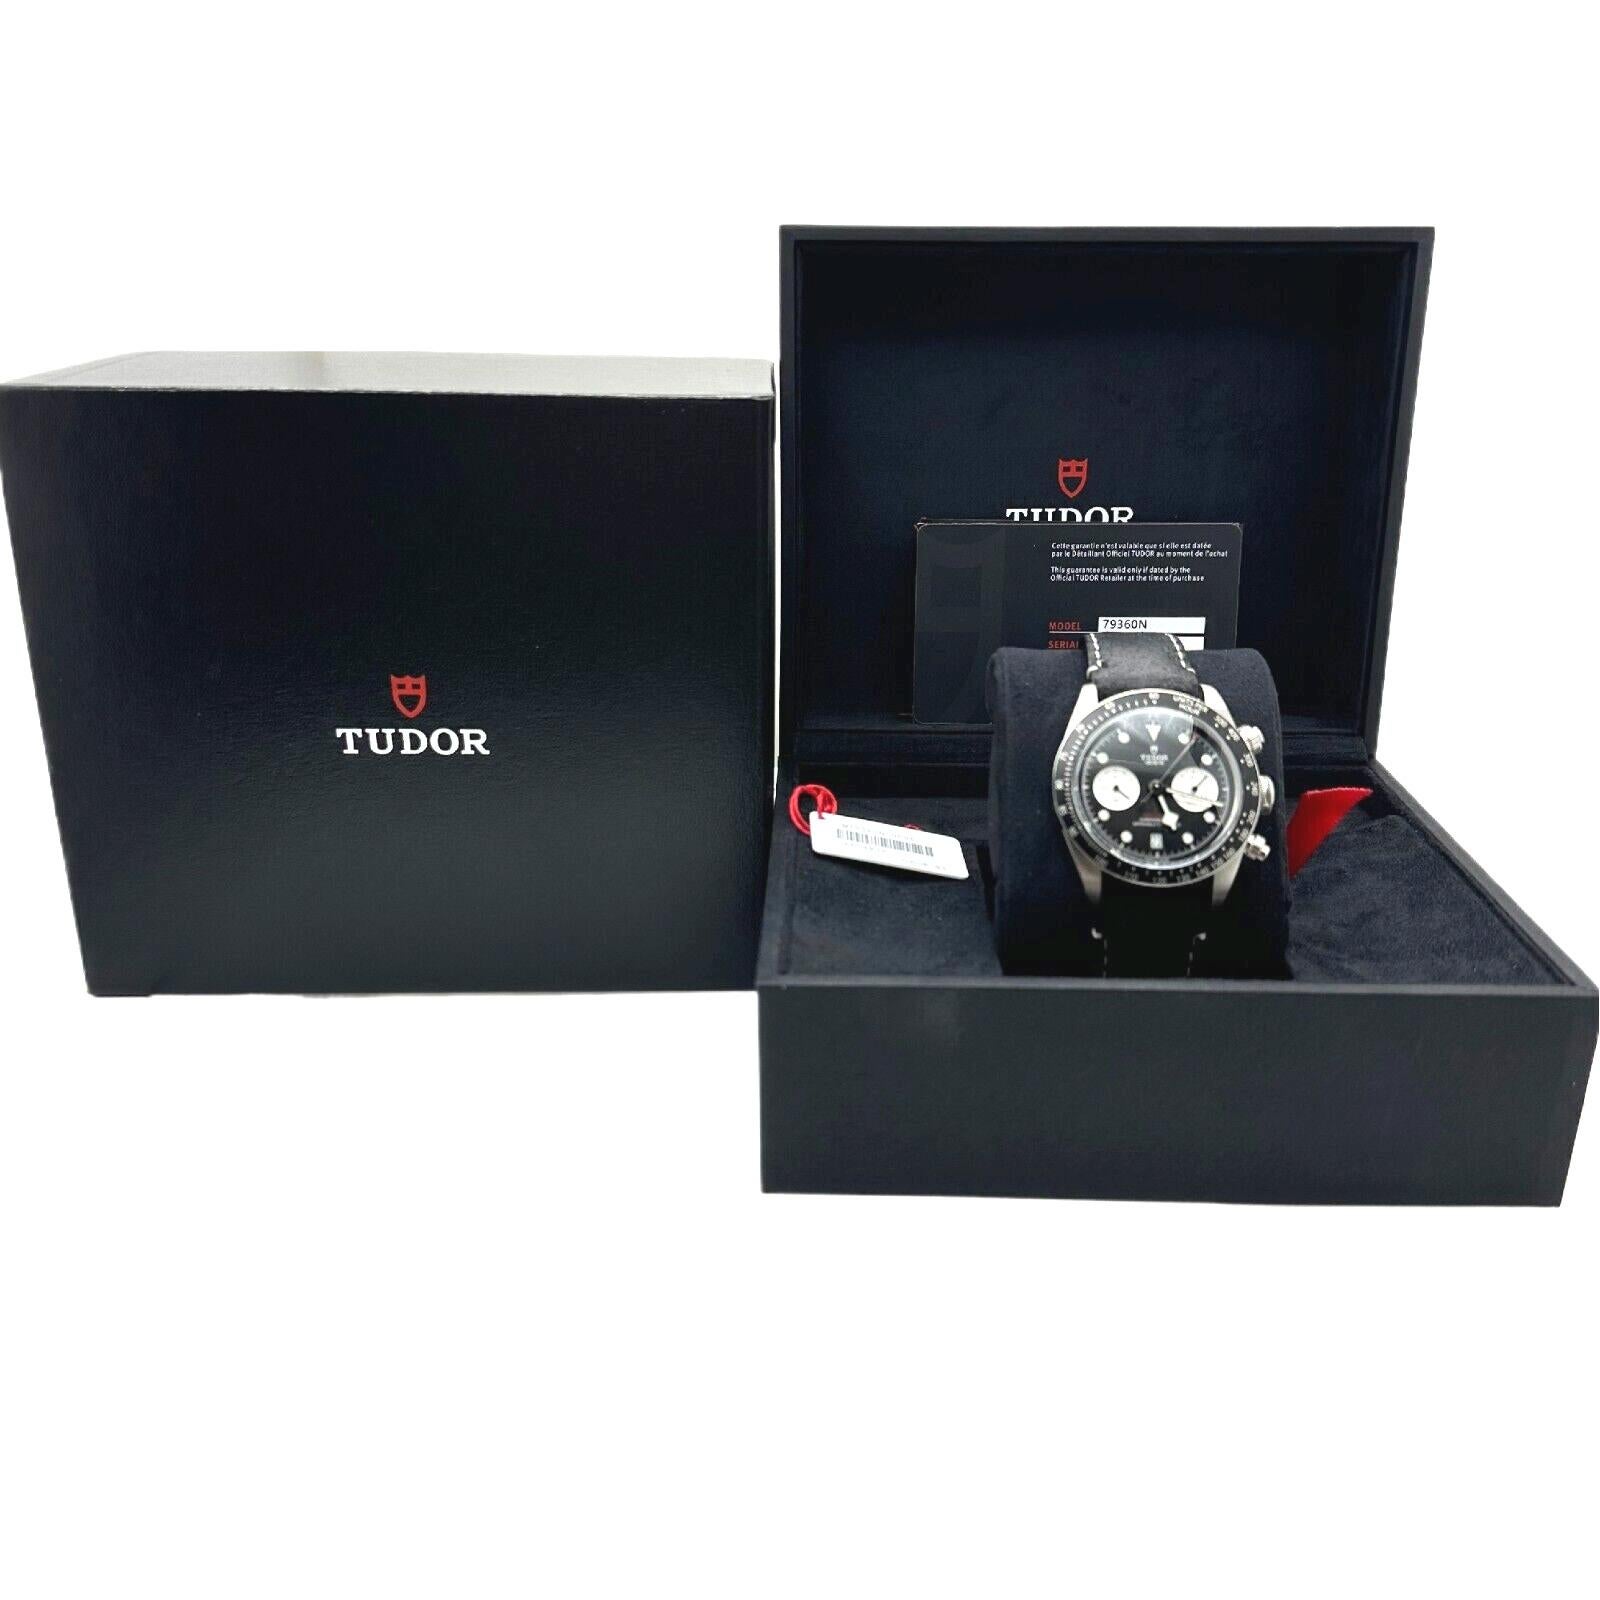 Style Number: 79360N

Serial: 68D4***

Year: 2023

Model: Heritage Black Bay

Case Material: Stainless Steel

Band: Leather

Bezel: Black

Dial: Black With Silver Counters

Face: Sapphire Crystal

Case Size: 41mm

Includes: 

-Tudor Box &